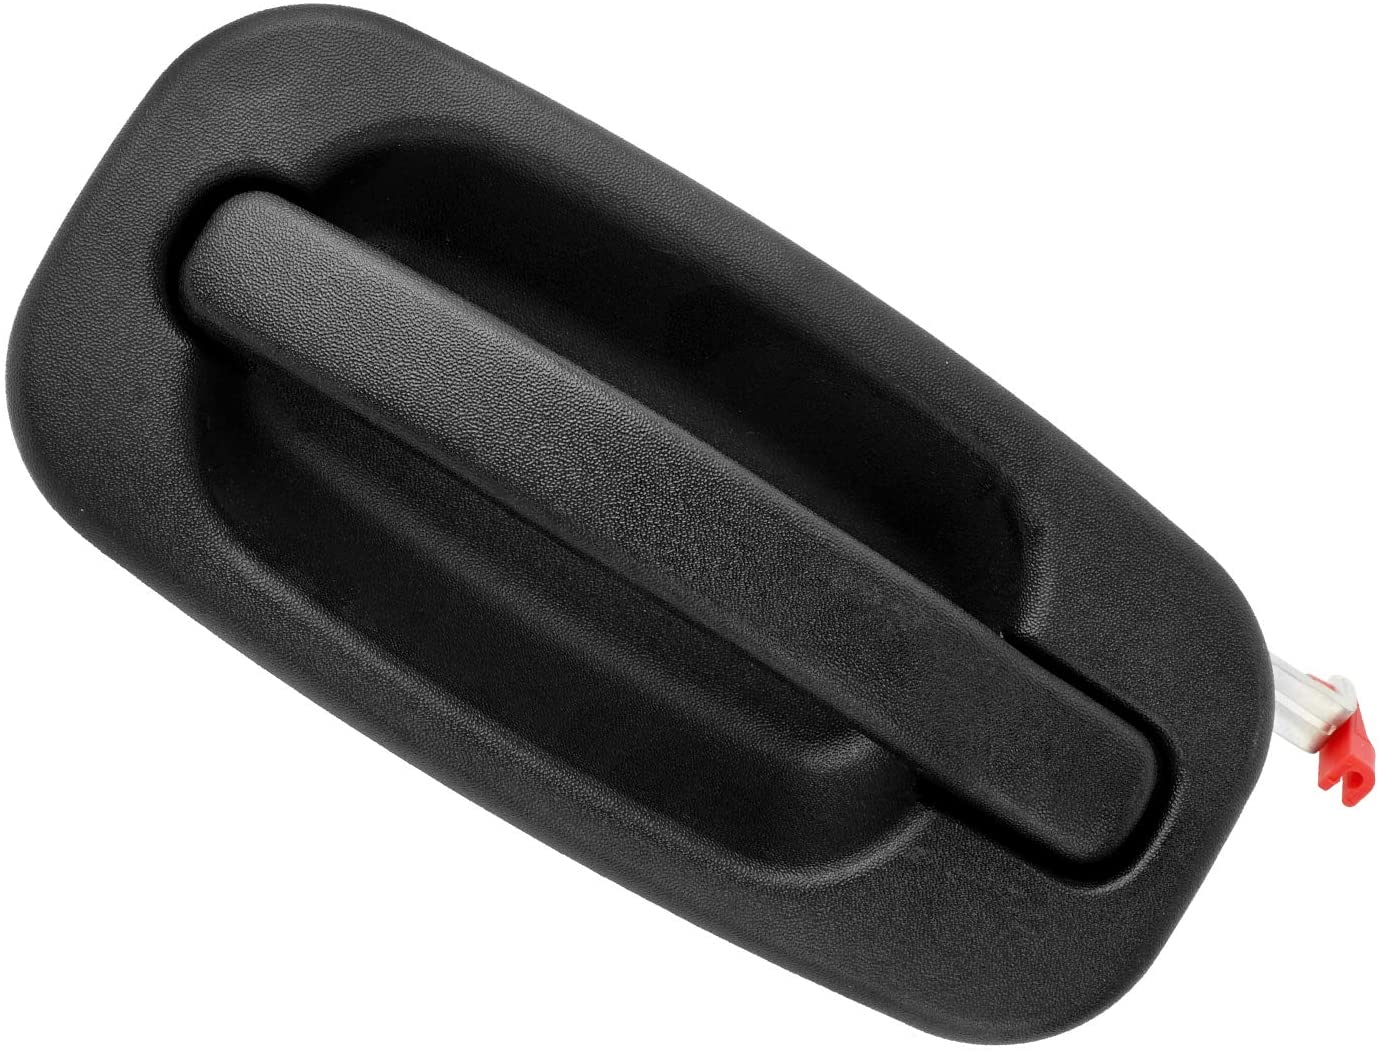 JADODE Black Door Handle Outside Exterior Rear Driver Side Left for Chevy GMC Cadillac